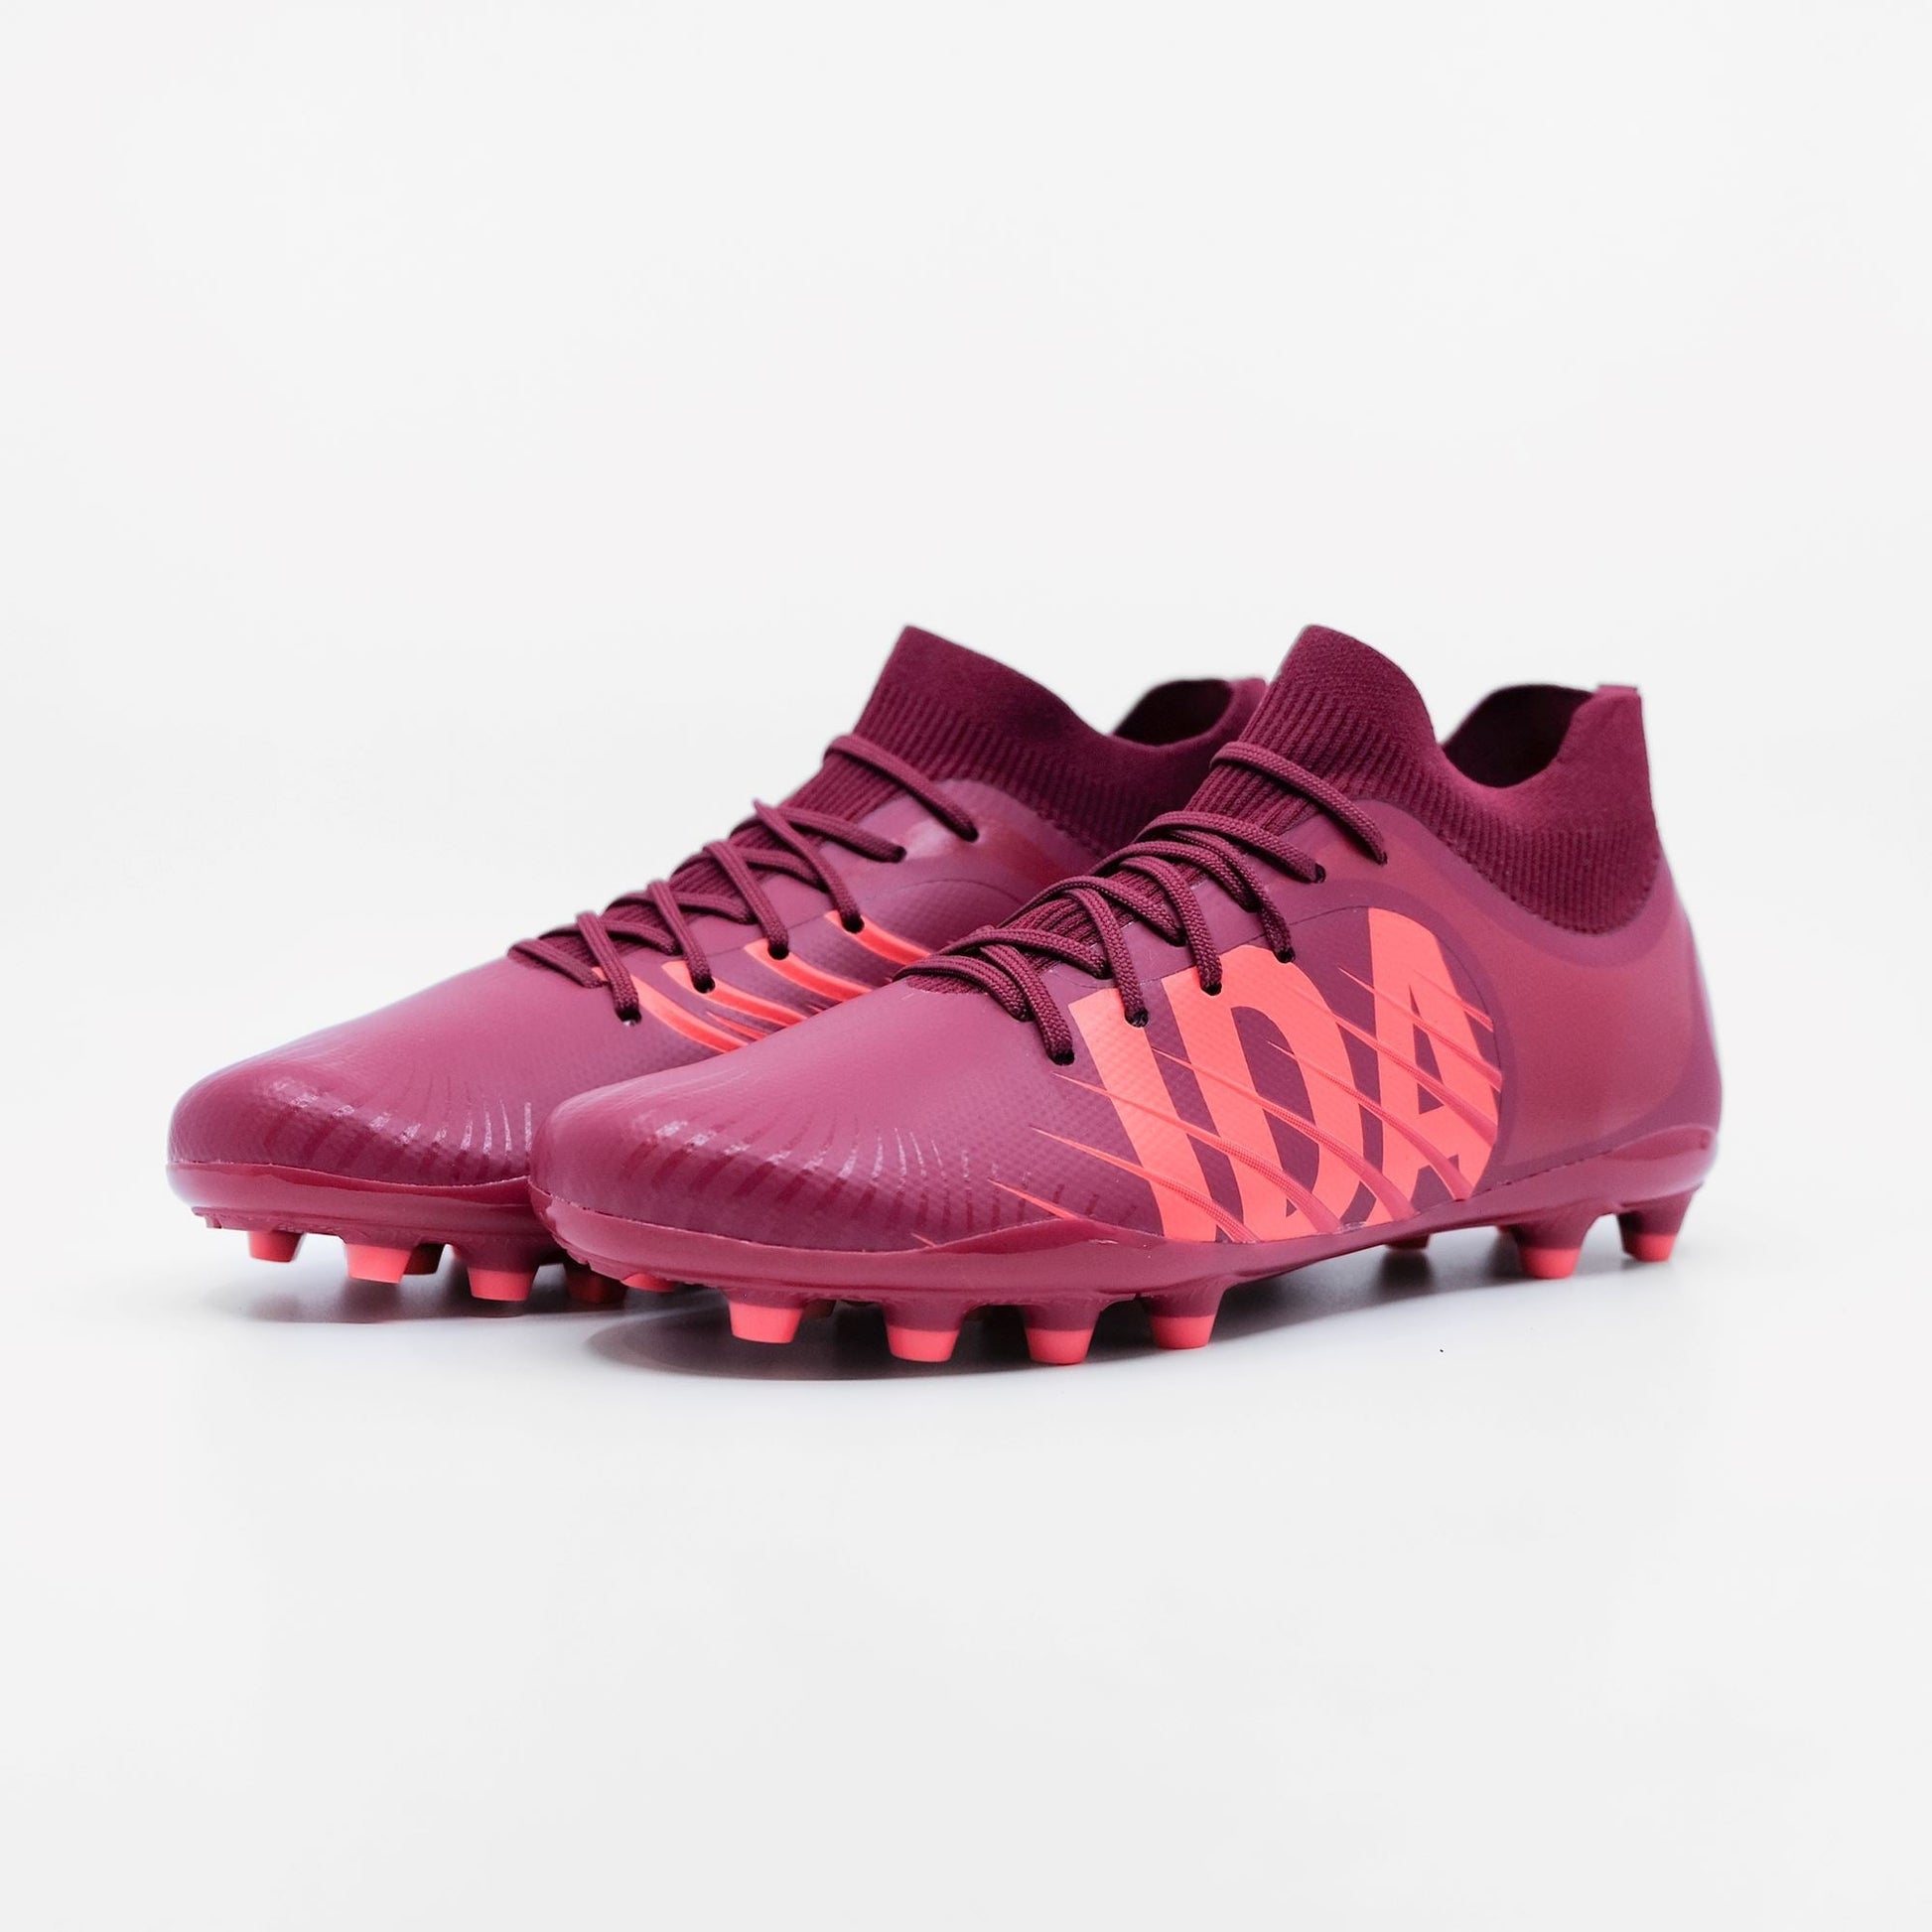 IDA Rise Women's Soccer Cleat, Burgundy, FG/AG, Firm Ground, Artificial Ground, Ankle sock